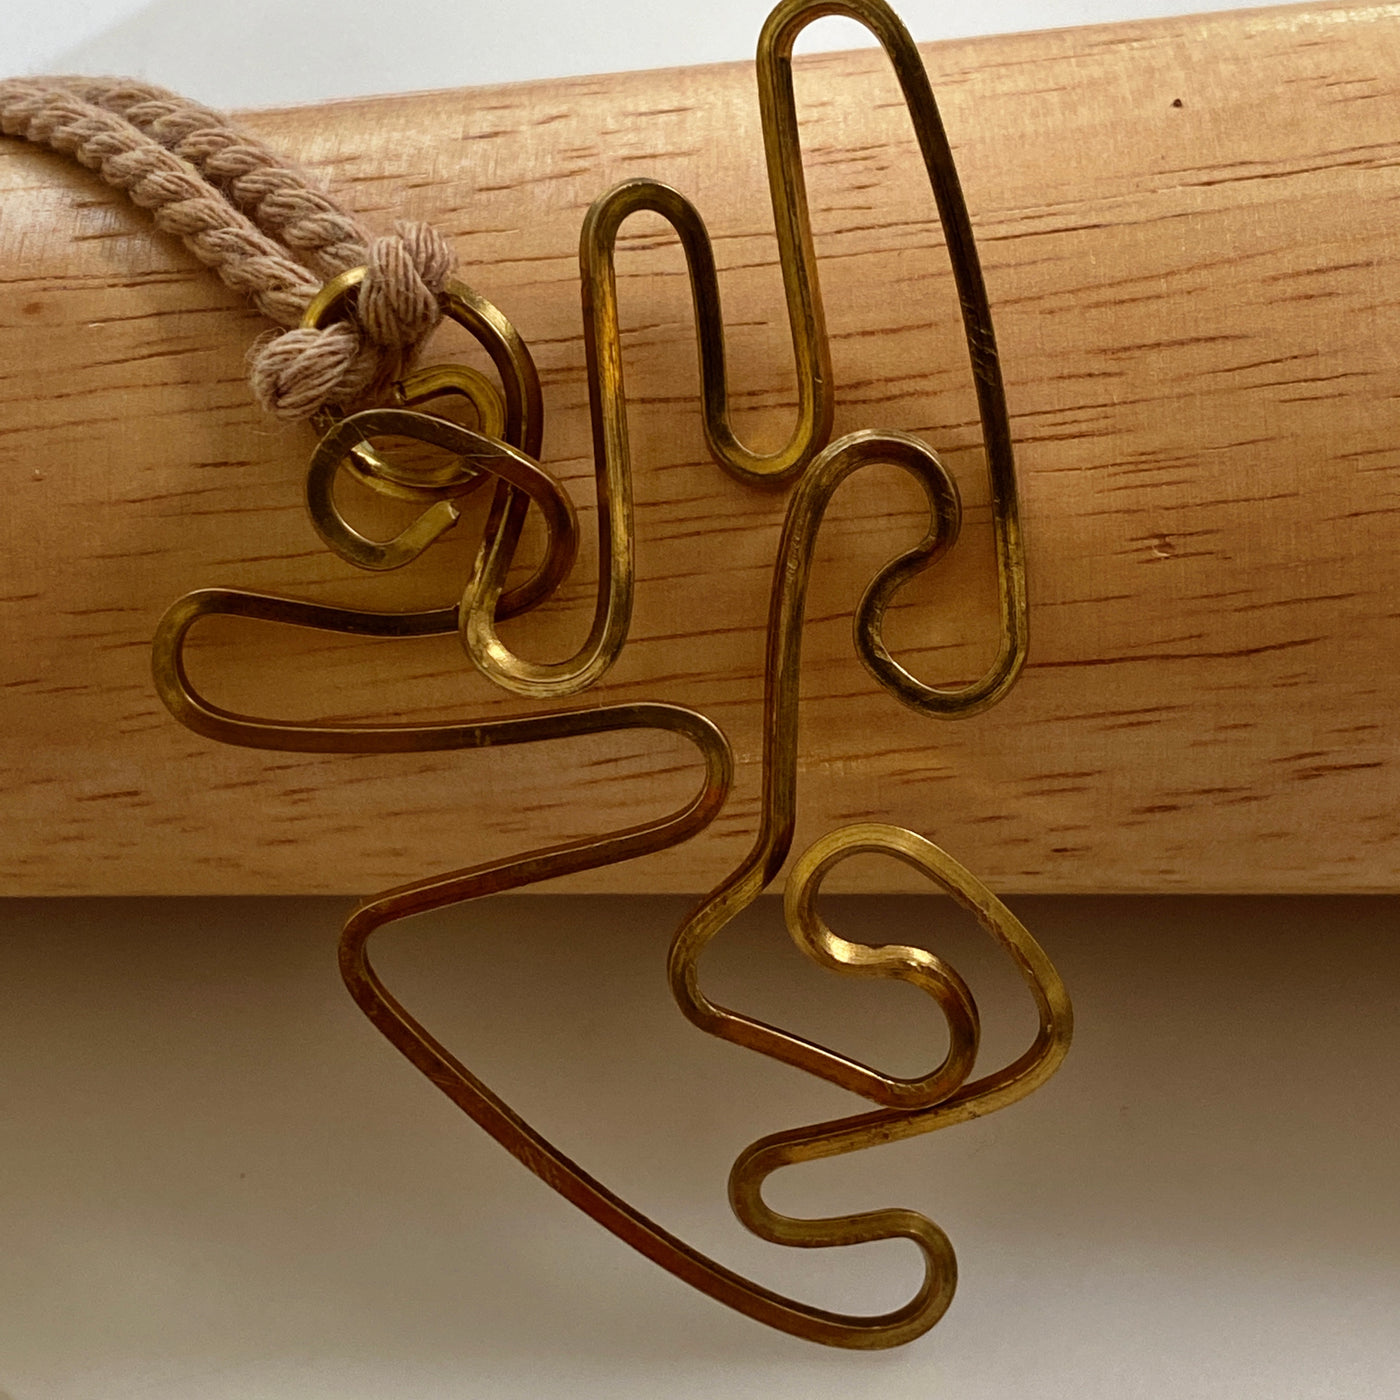 Abstract brass pendant on thick adjustable cord